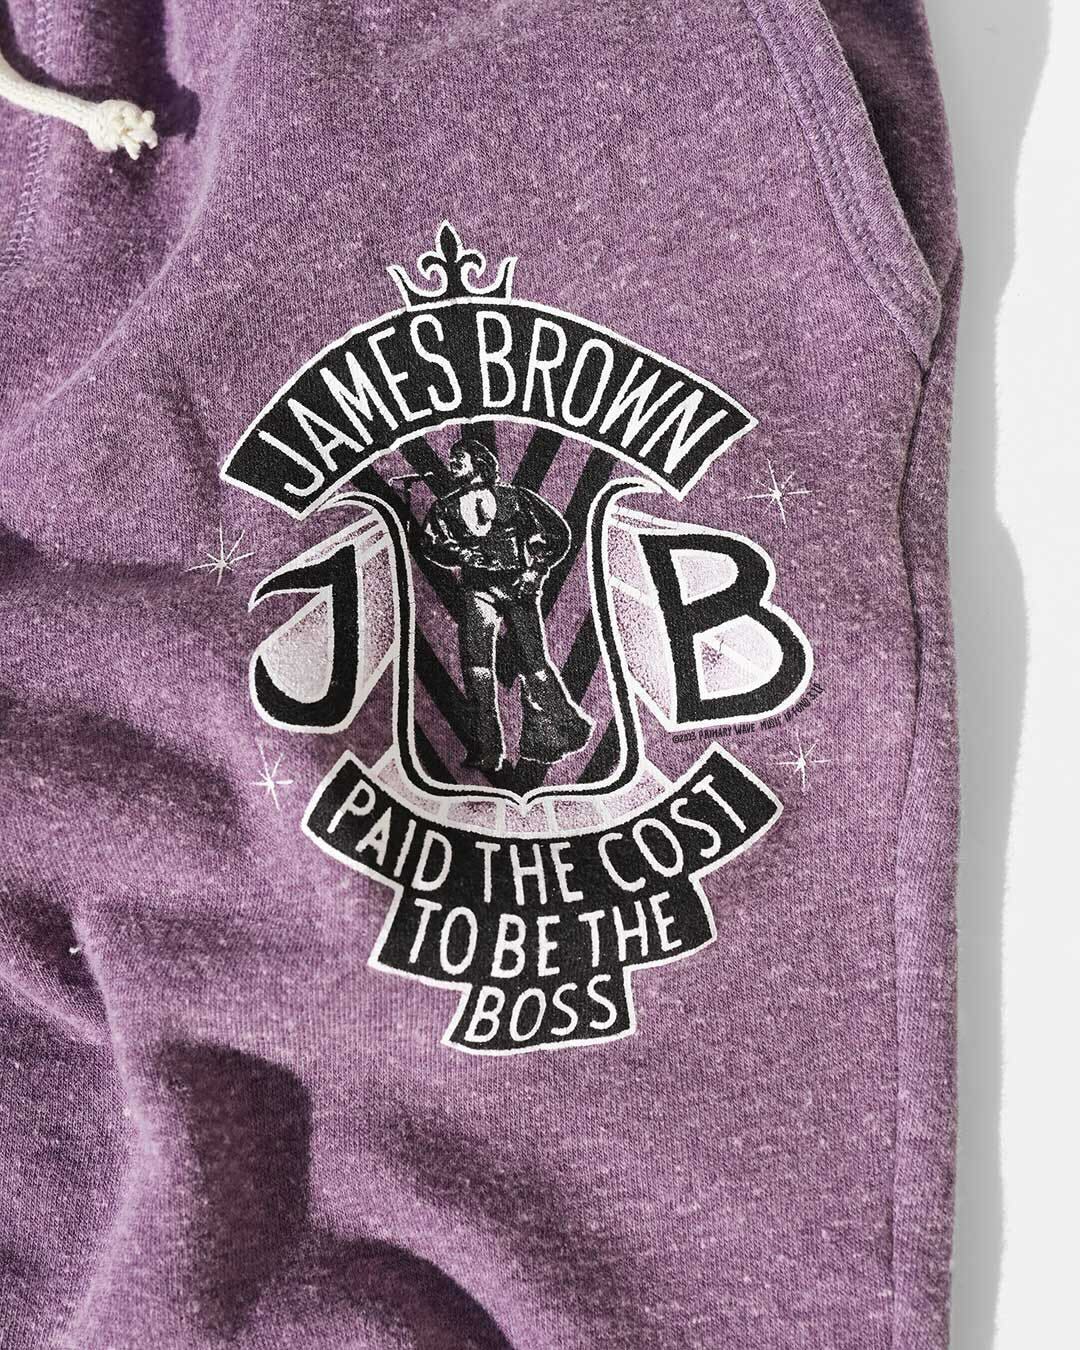 James Brown G.F.O.S Purple Sweatpants - Roots of Fight Canada